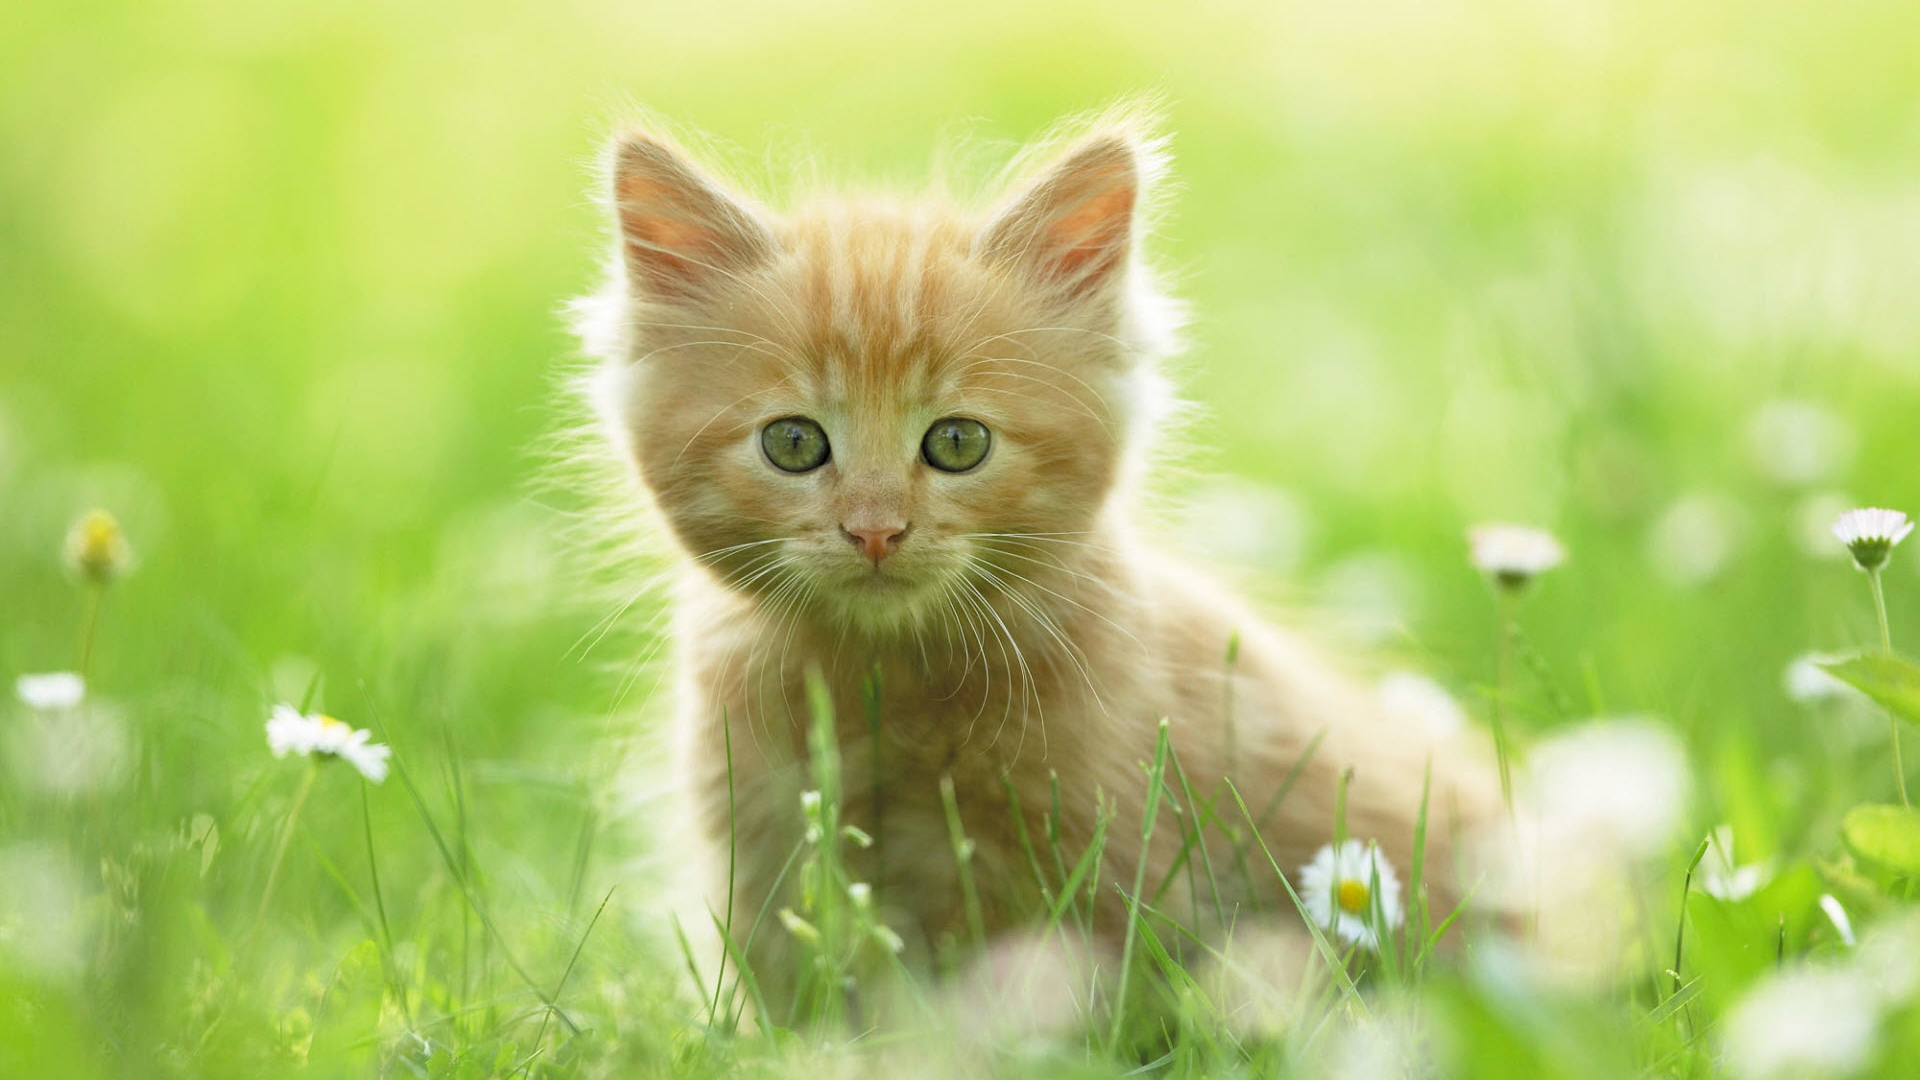 Free download Spring Cat Wallpaper High Definition High Quality Widescreen [1920x1200] for your Desktop, Mobile & Tablet. Explore Spring Wallpaper with Cats. Abstract Spring Desktop Wallpaper, Kitten Spring Wallpaper